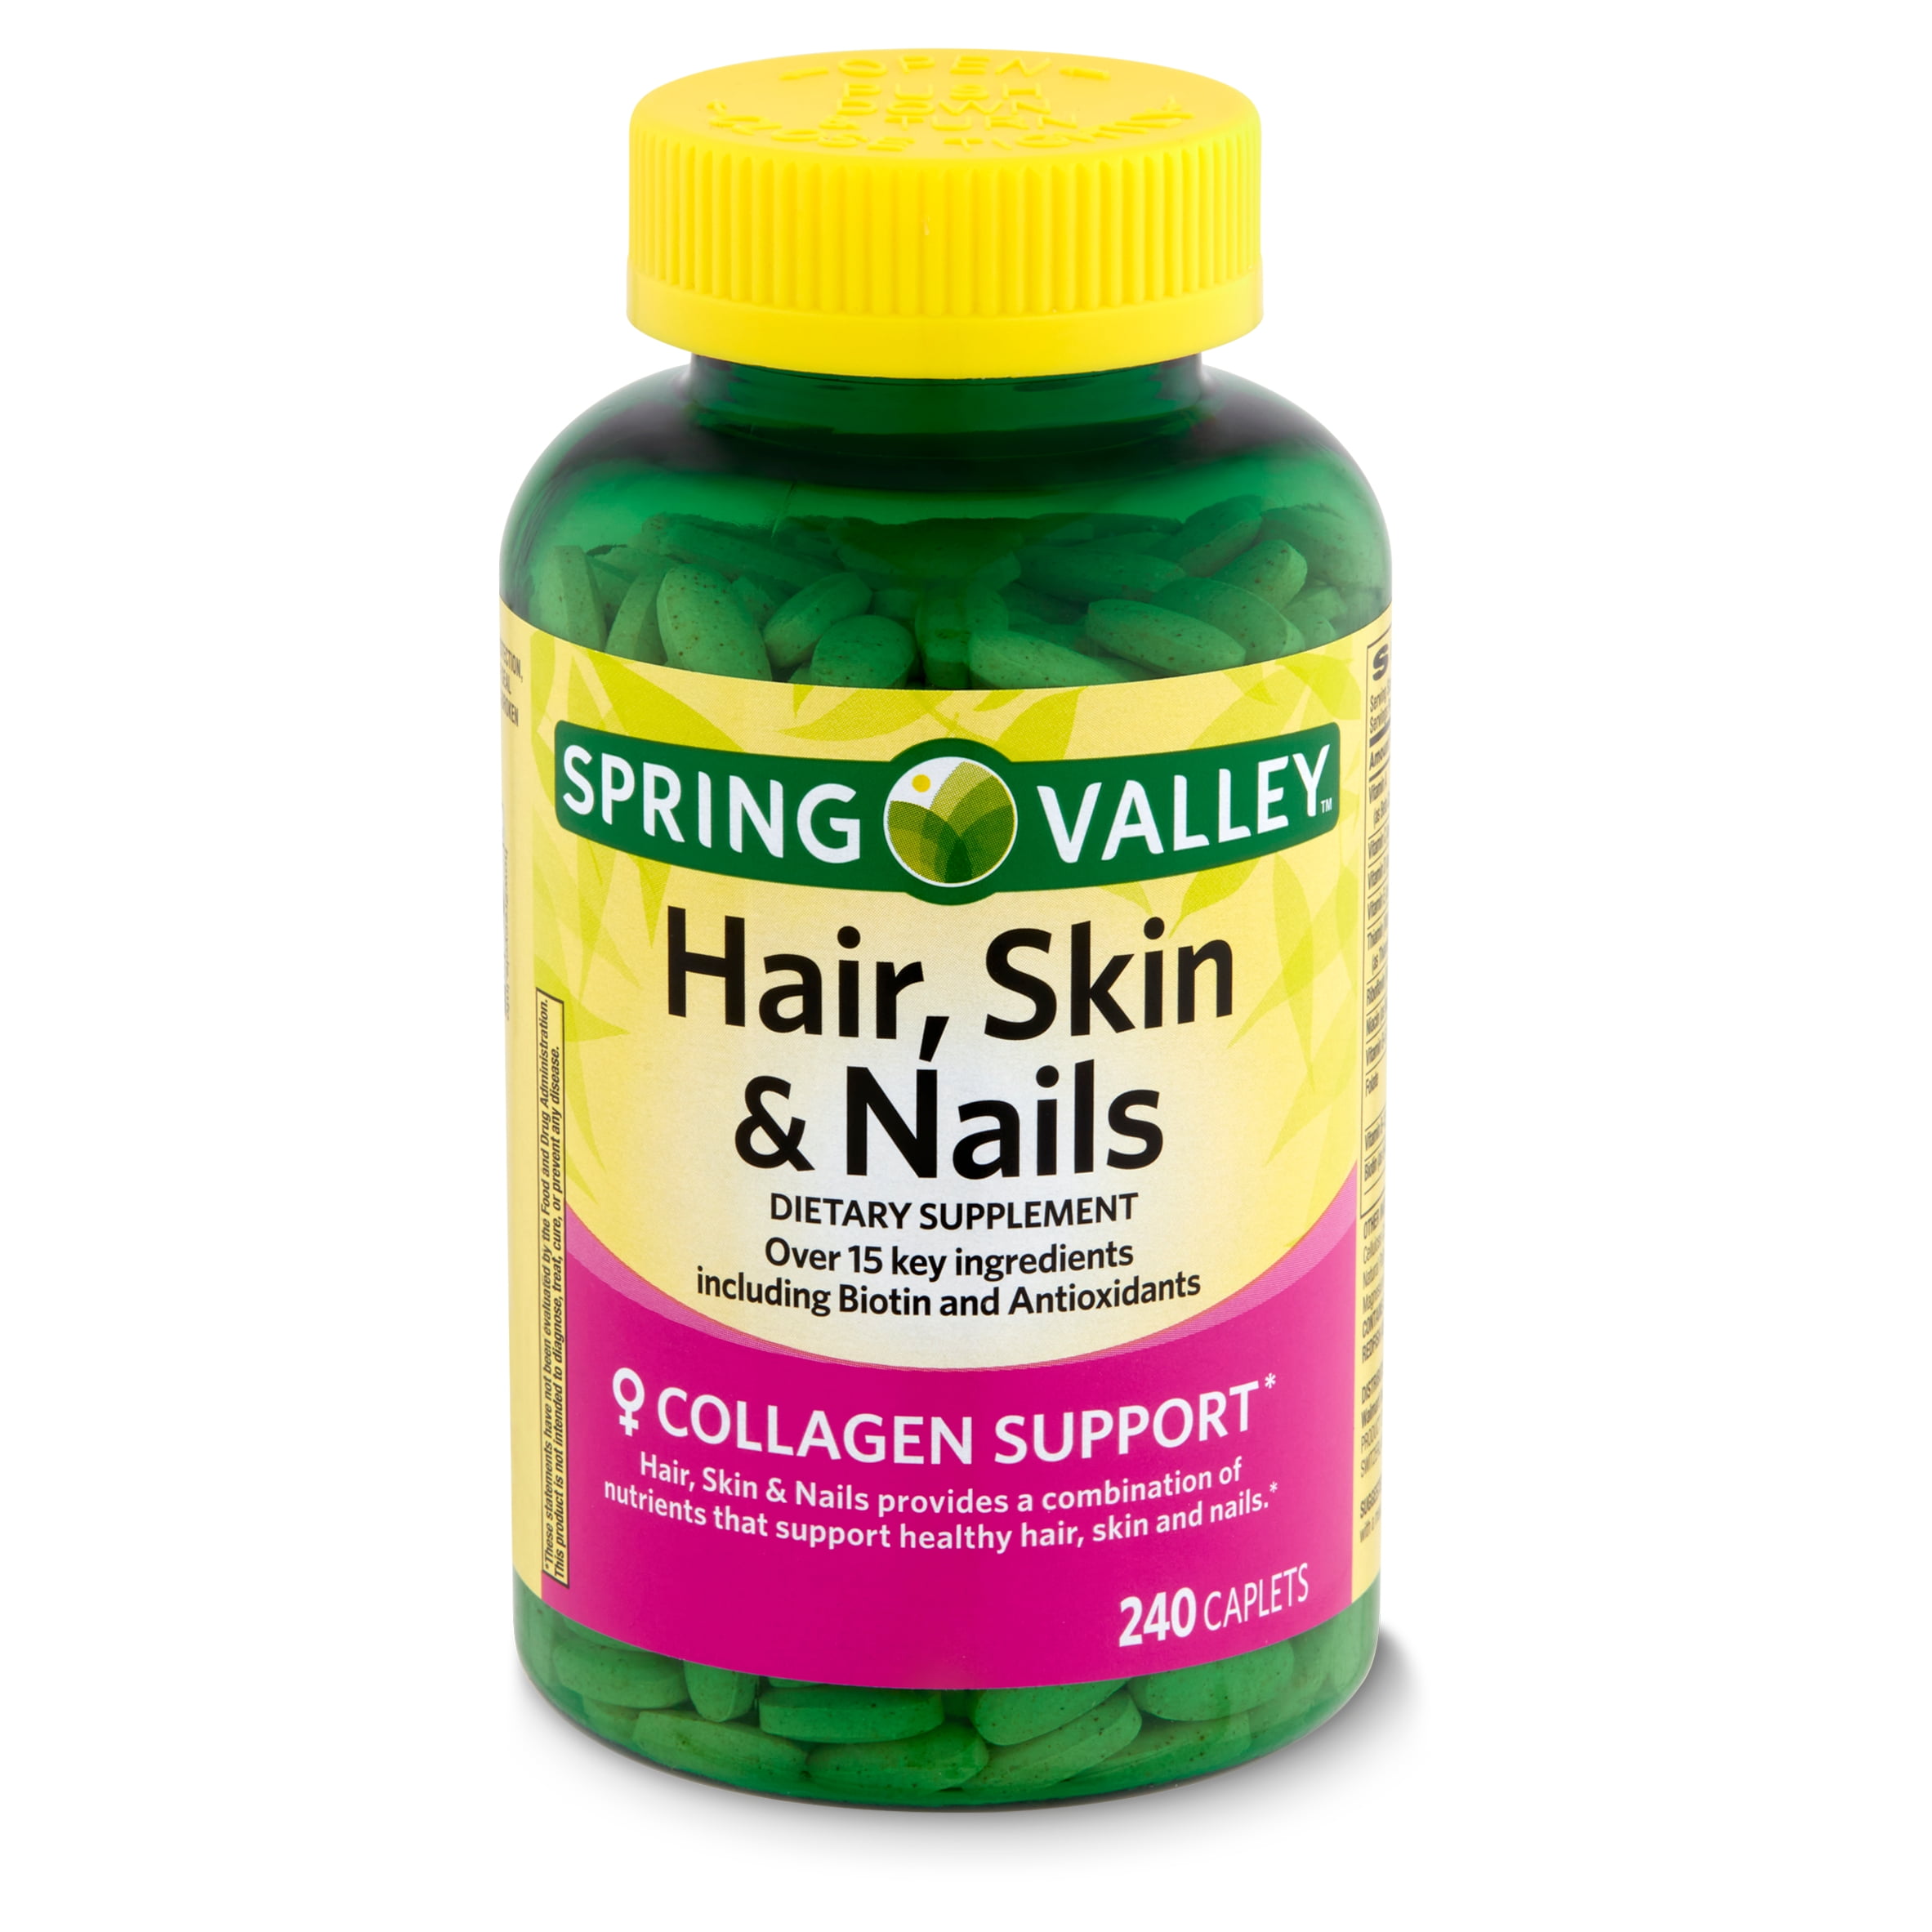 Spring Valley Hair, Skin & Nails Dietary Supplement, 240 count 